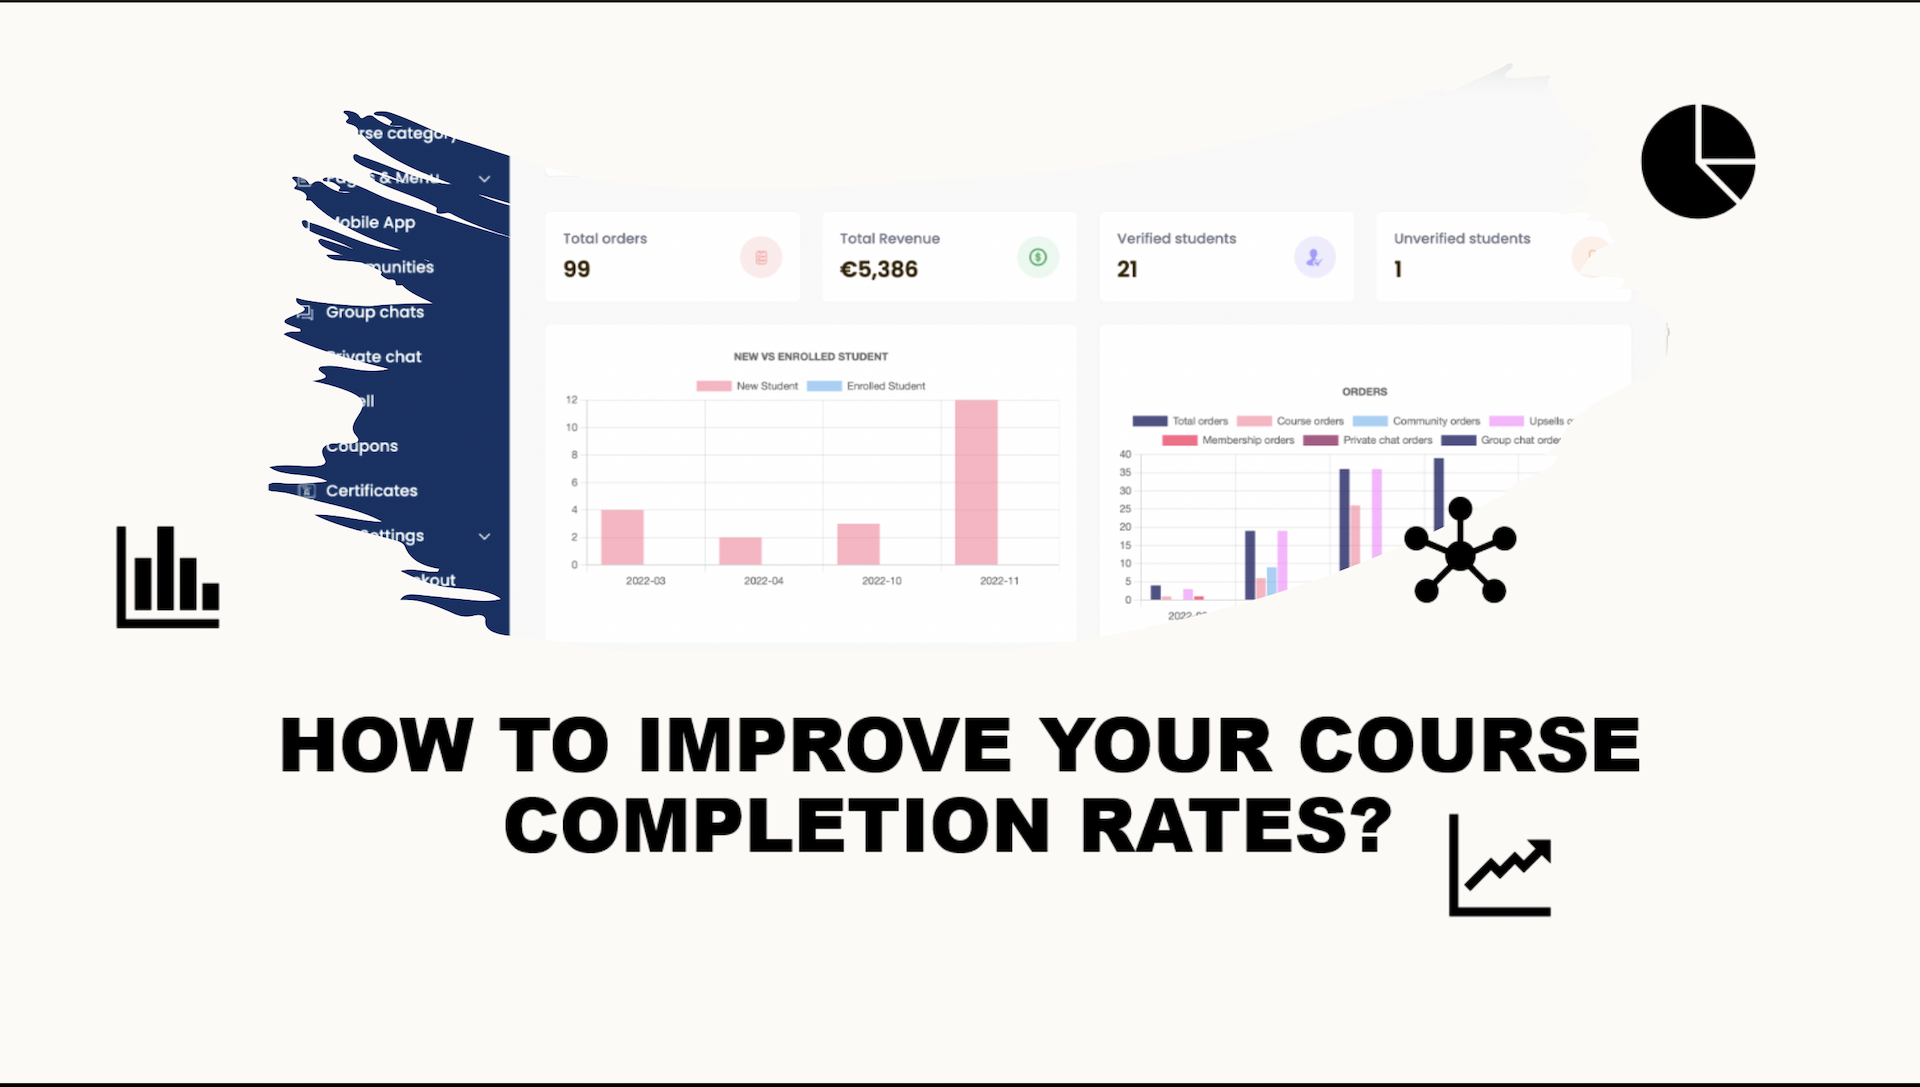 How to improve your course completion rates?